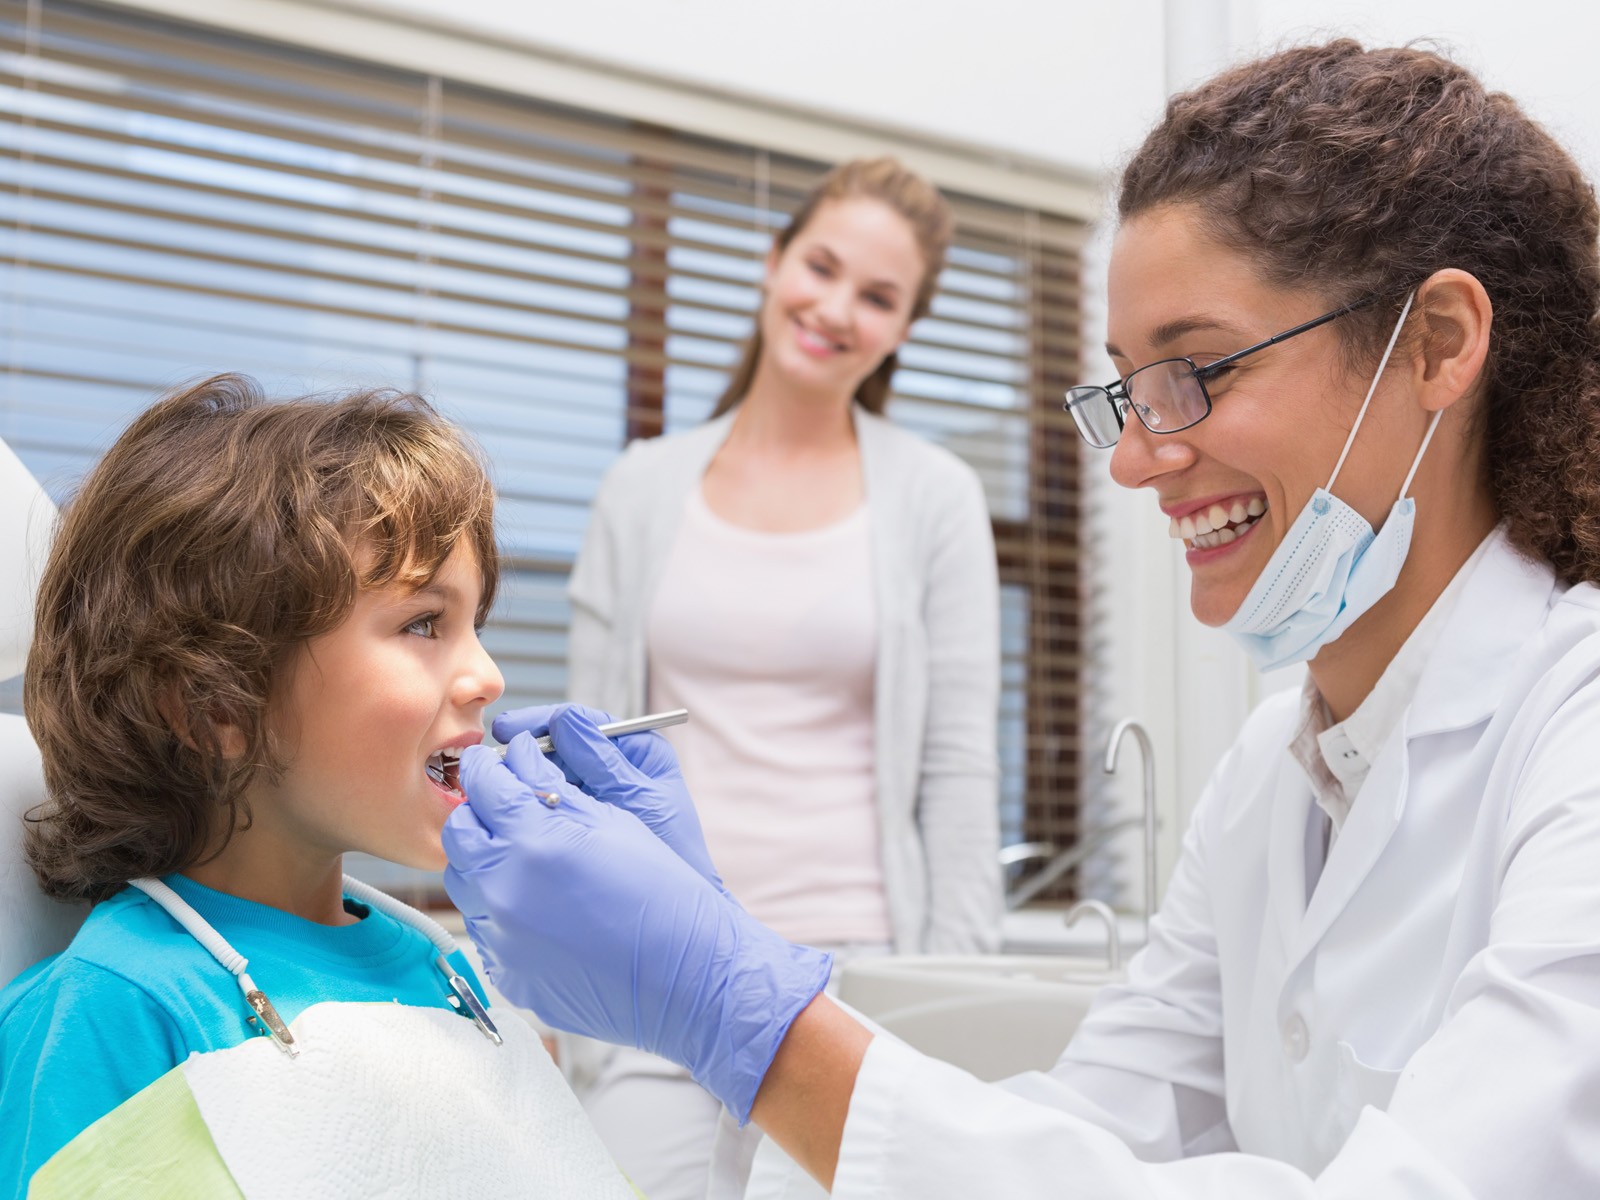 What To Expect At Your Child’s First Visit To The Dentist?